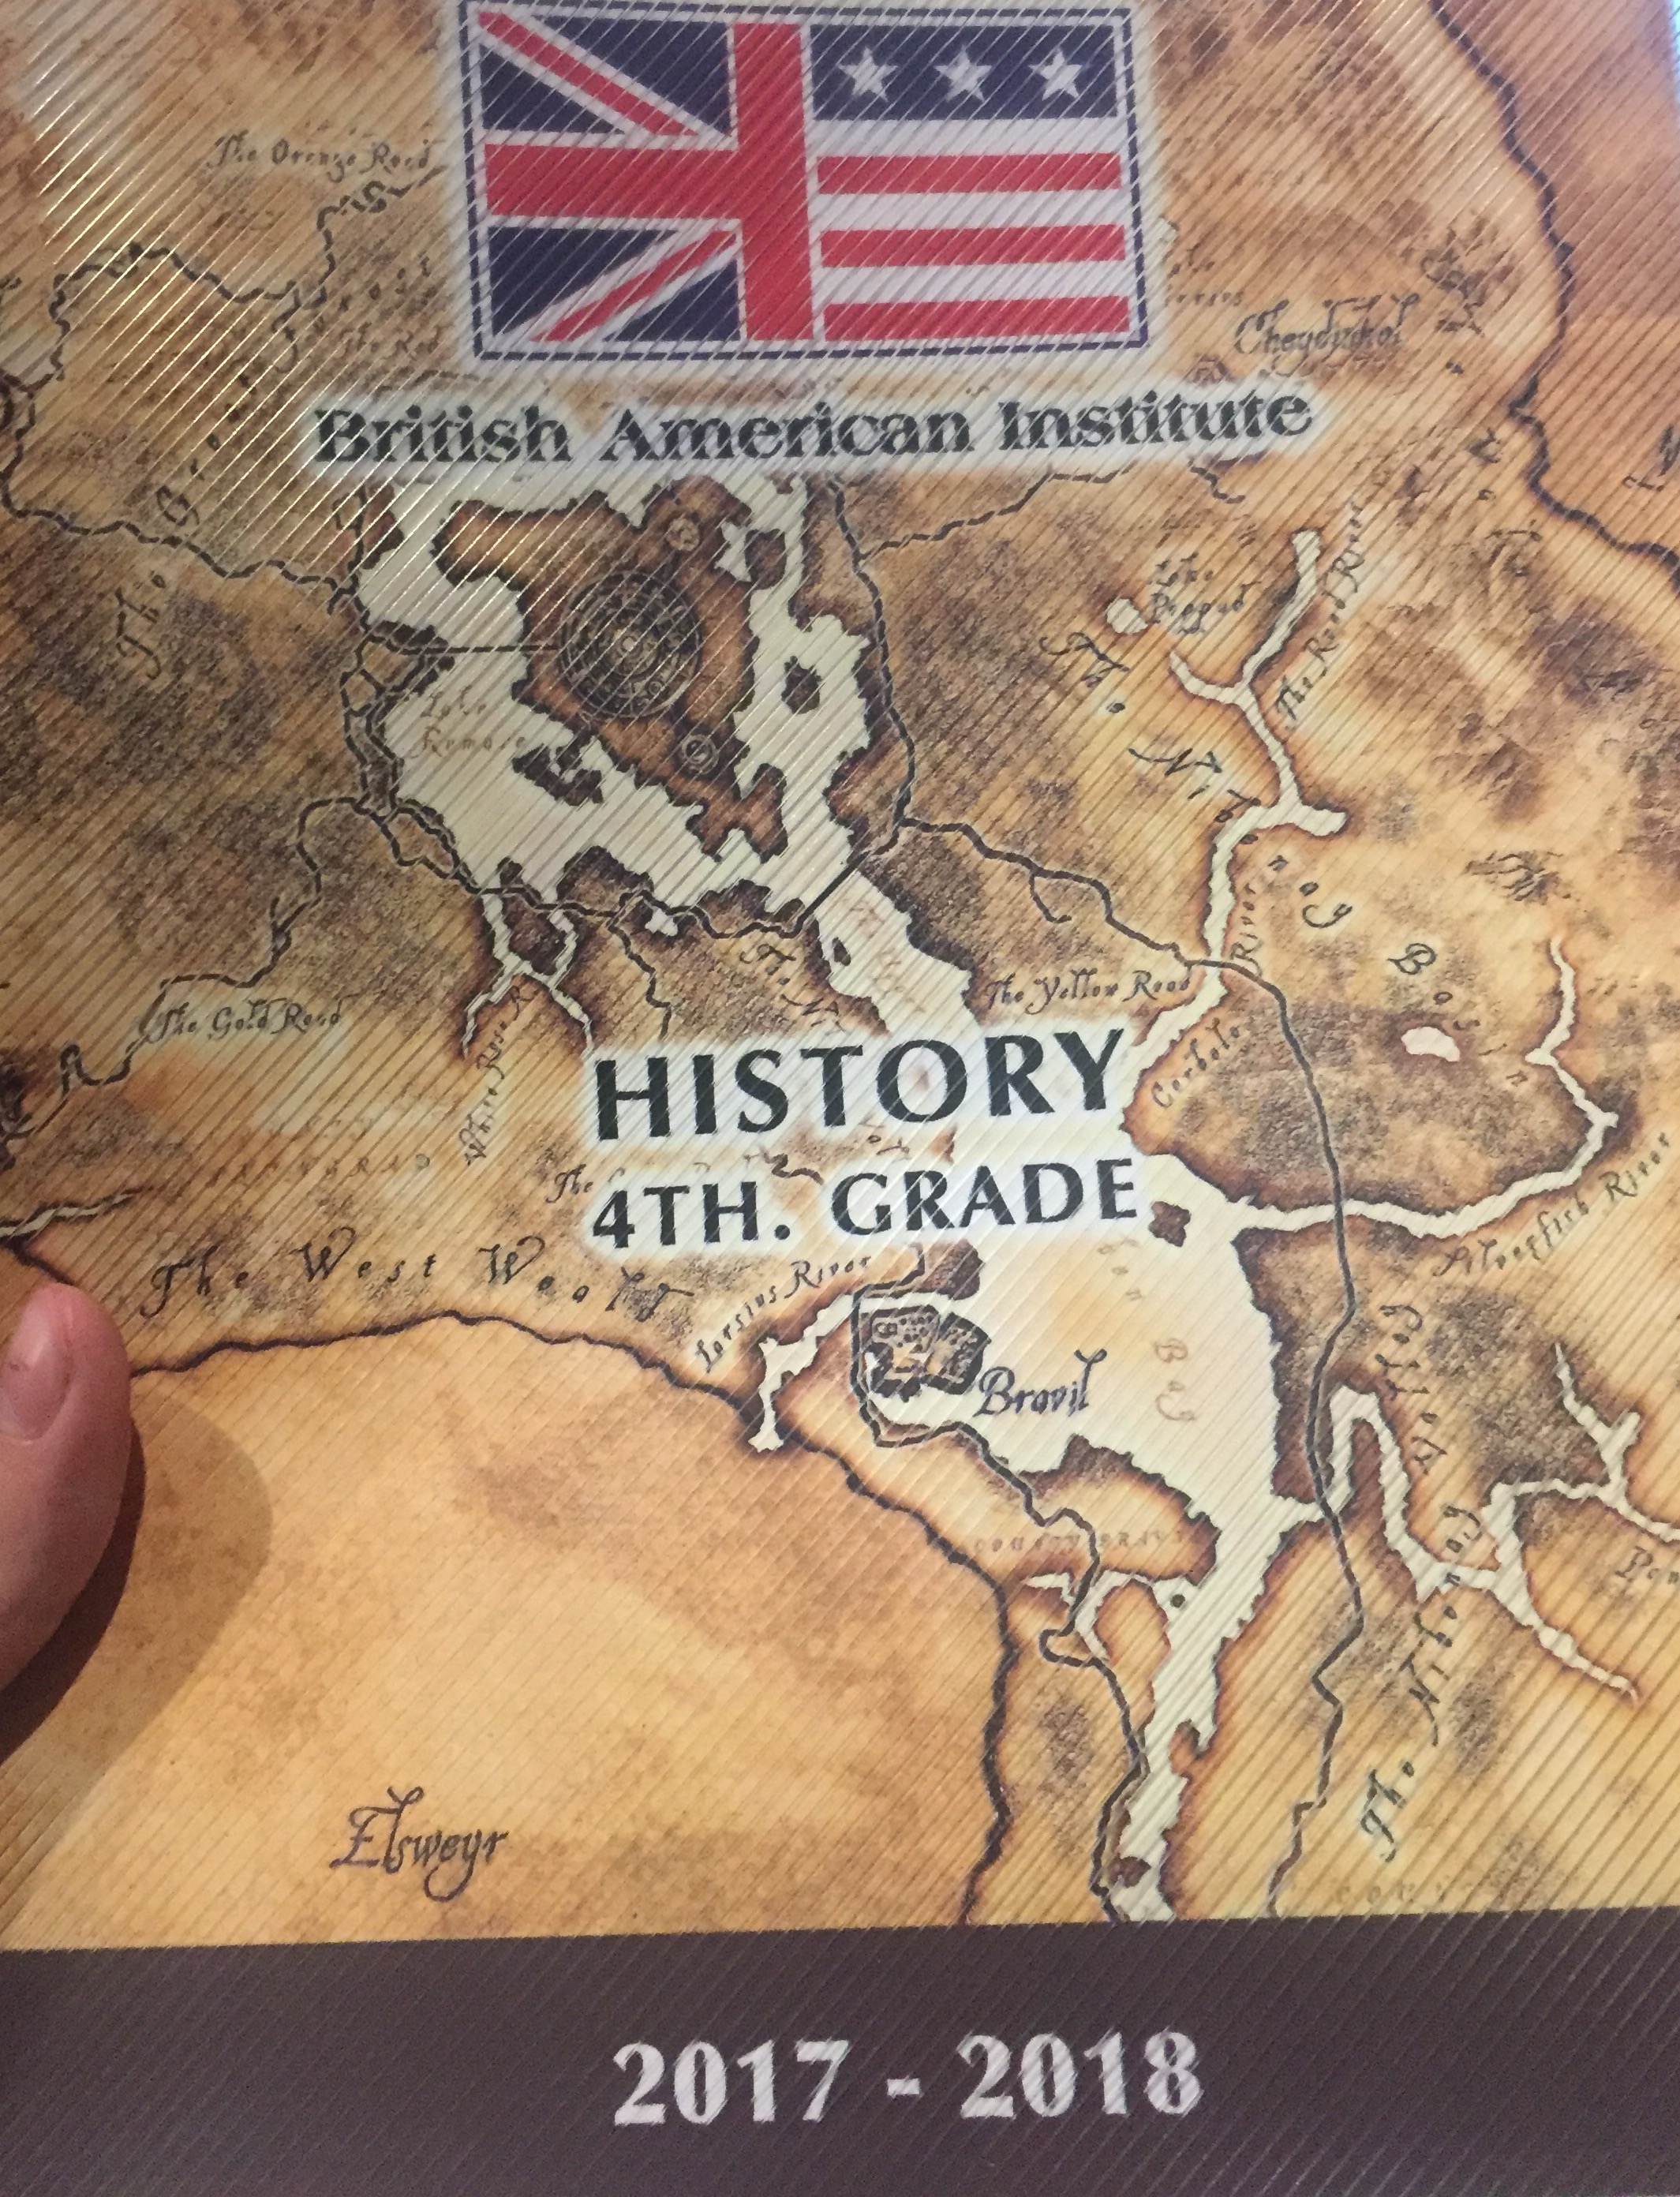 My Brothers School Uses A Map Of Tamriel For Their History Book